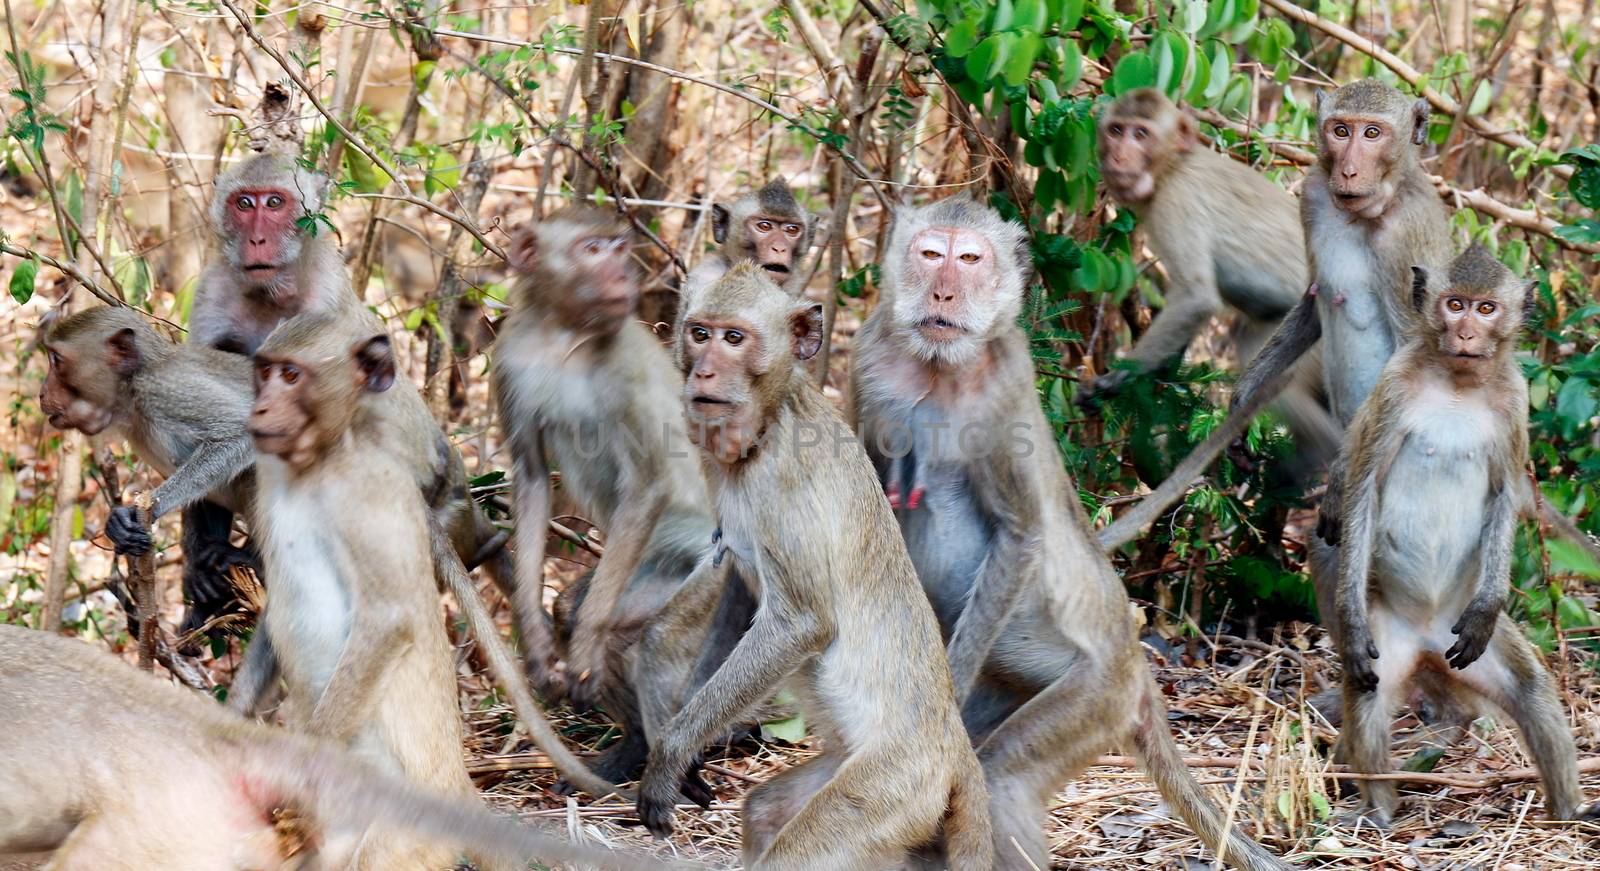 Monkeys, Lots of monkeys panicked stampede Jumping and movement in the forest by cgdeaw